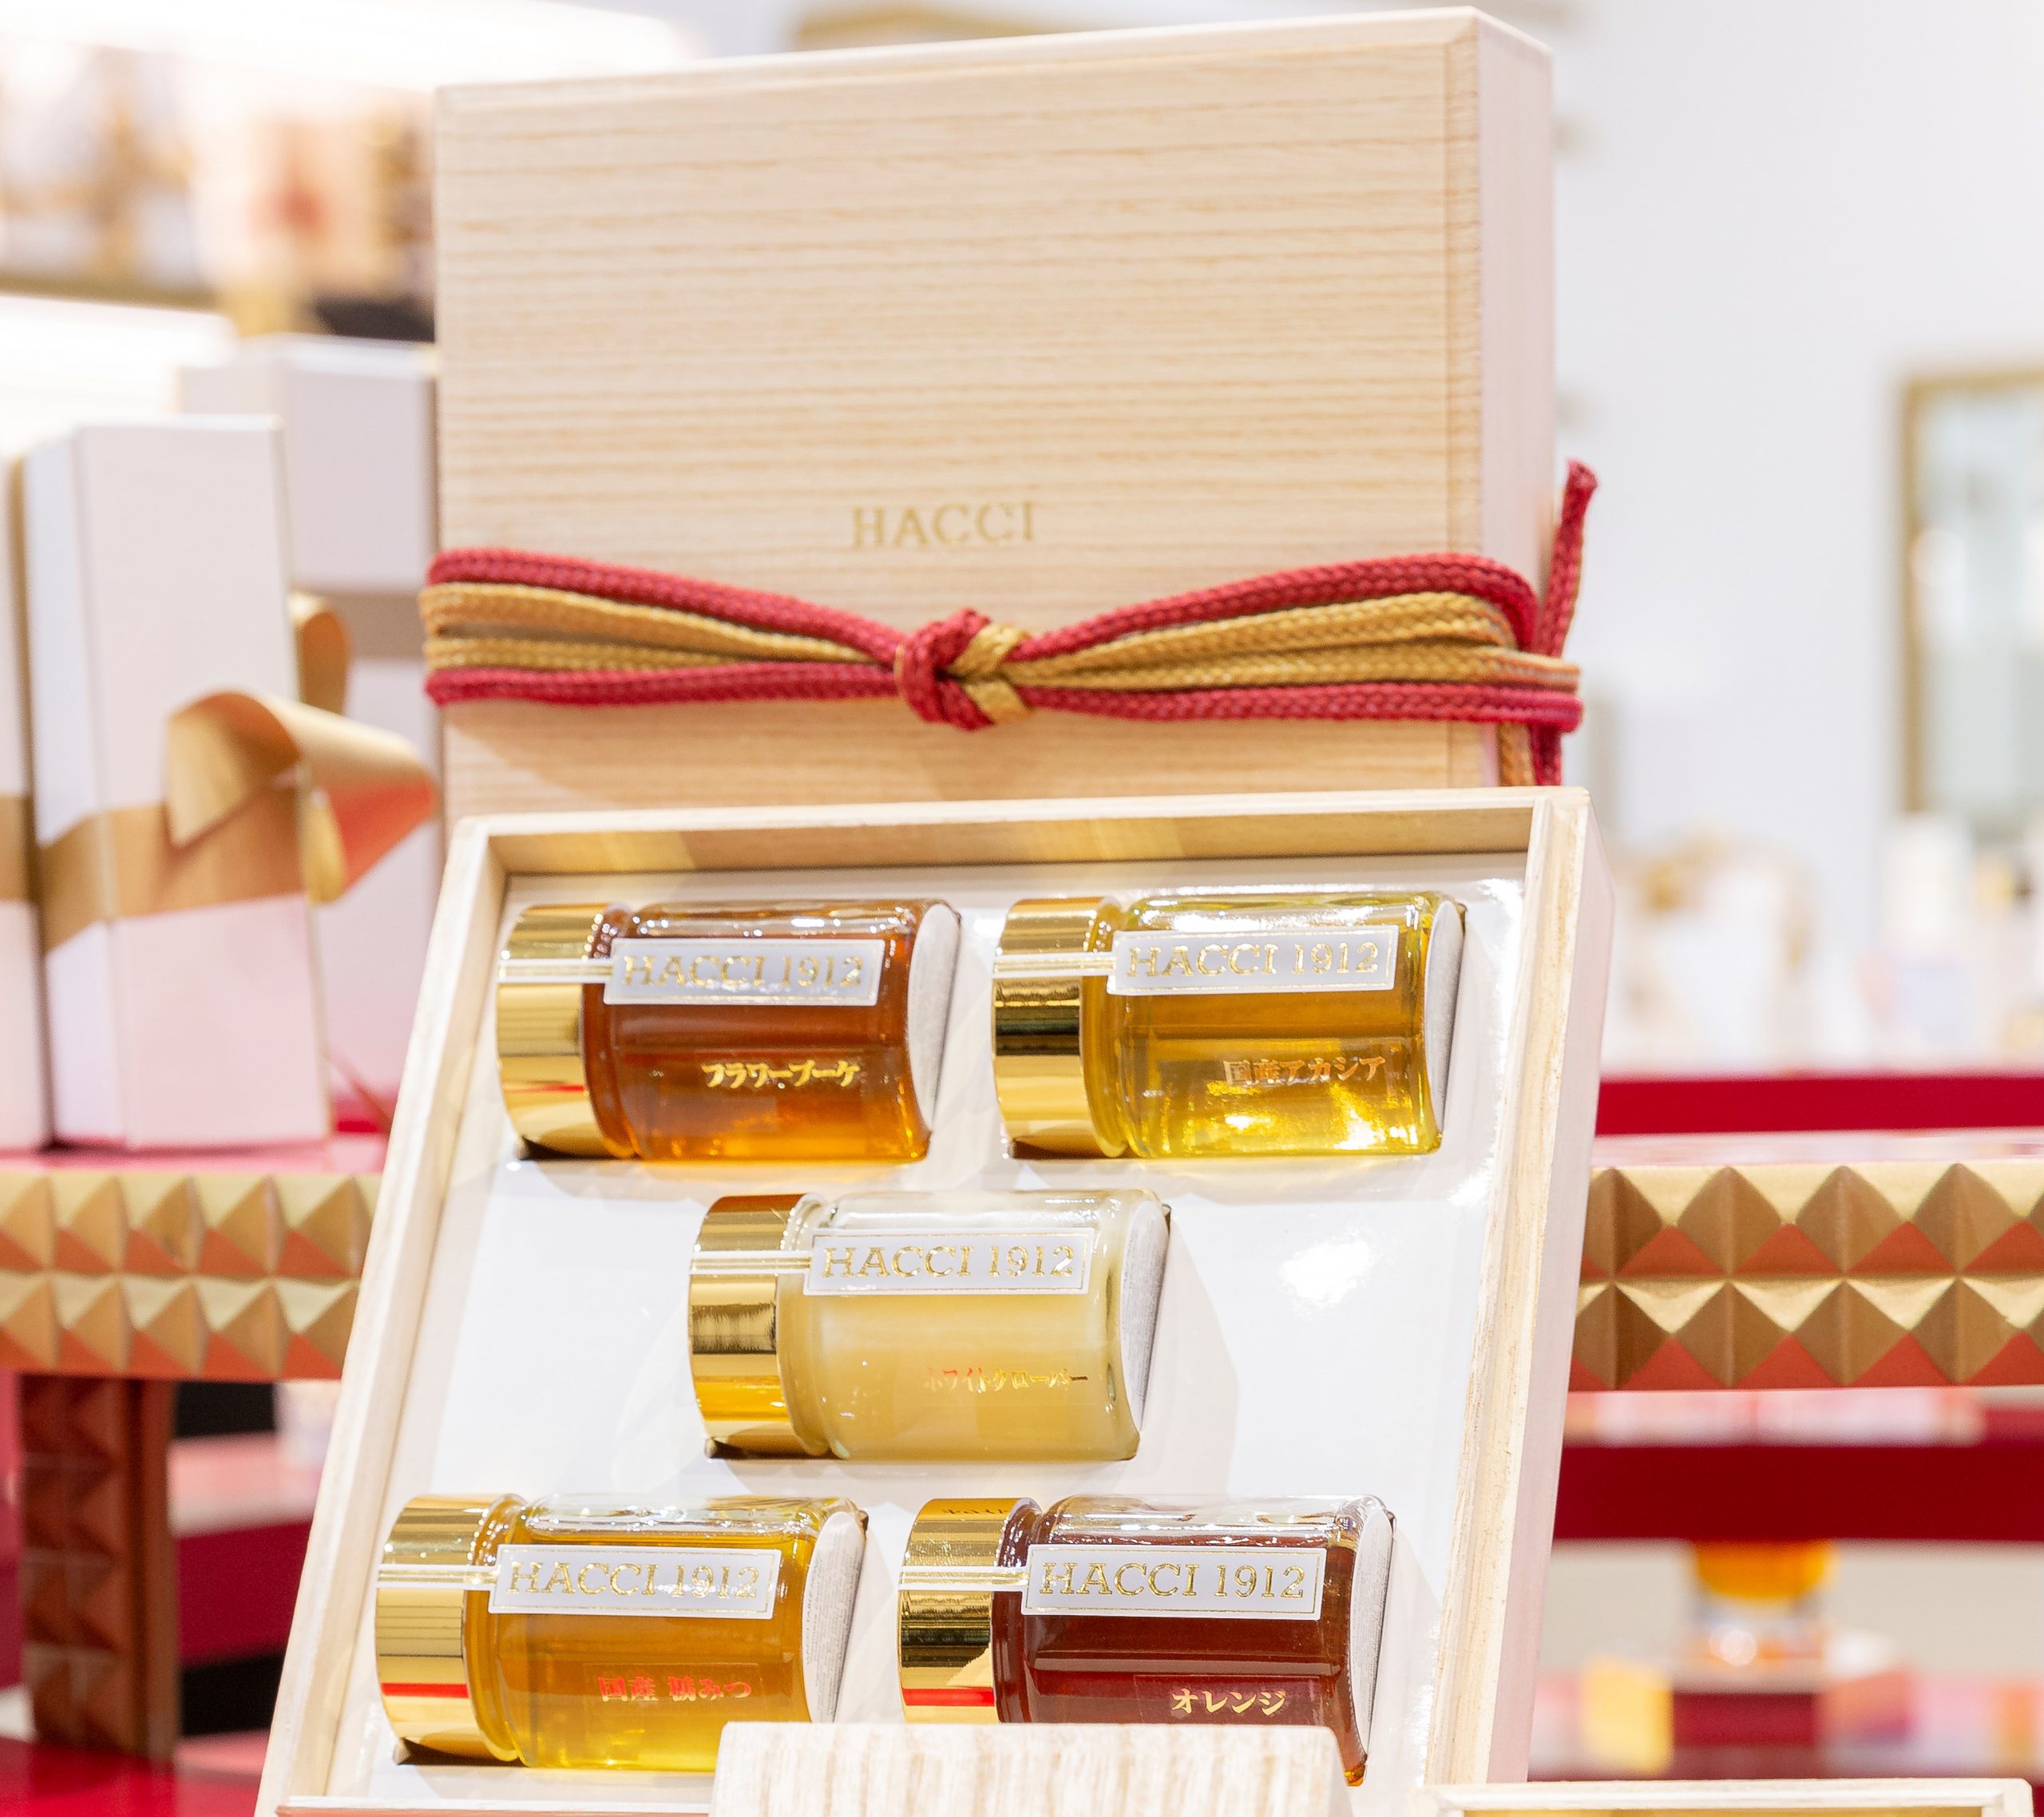 Japanese beauty brand HACCI aspires to create honey-based products for